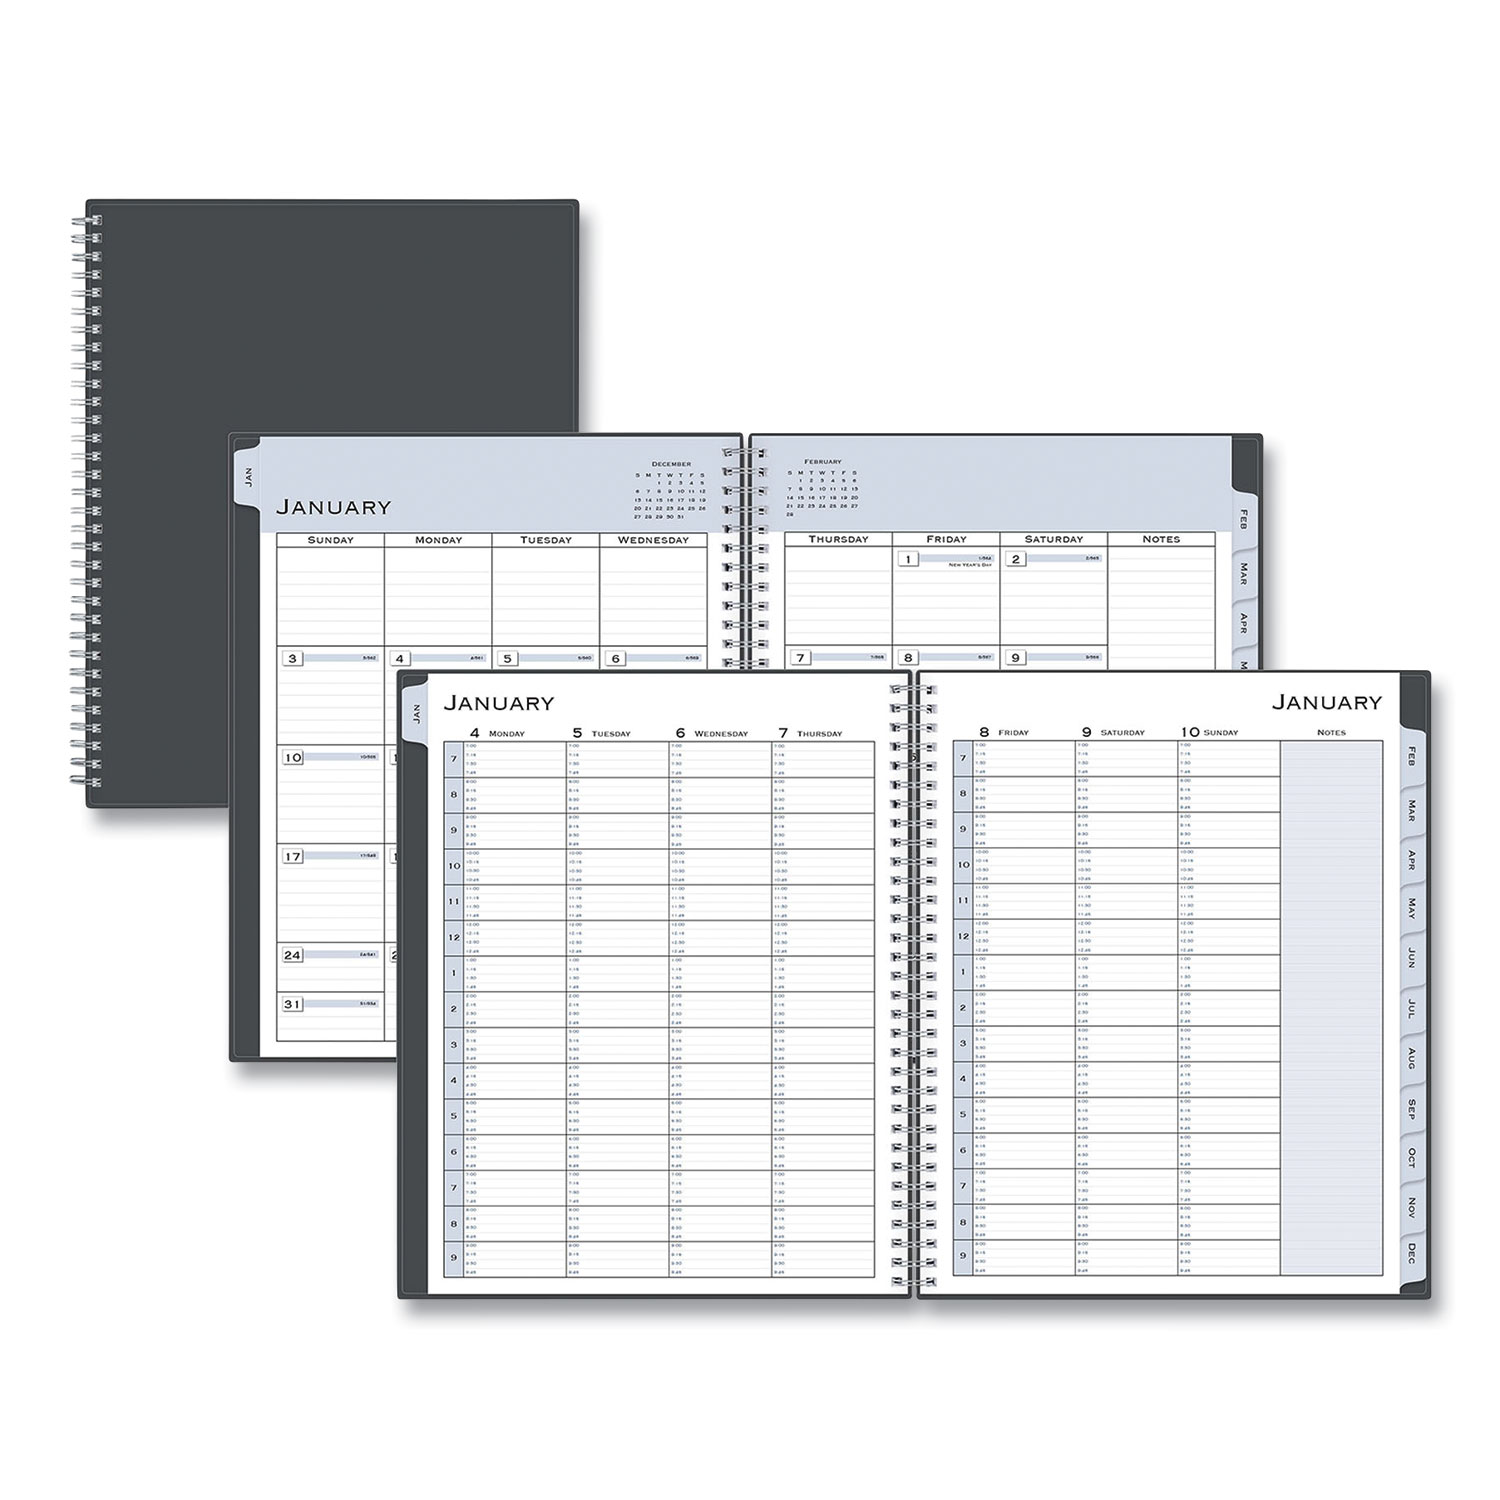  Blue Sky 100009 Passages Appointment Planner, Vertical Format, 11 x 8.5, Black Cover, 2020 (BLS100009) 